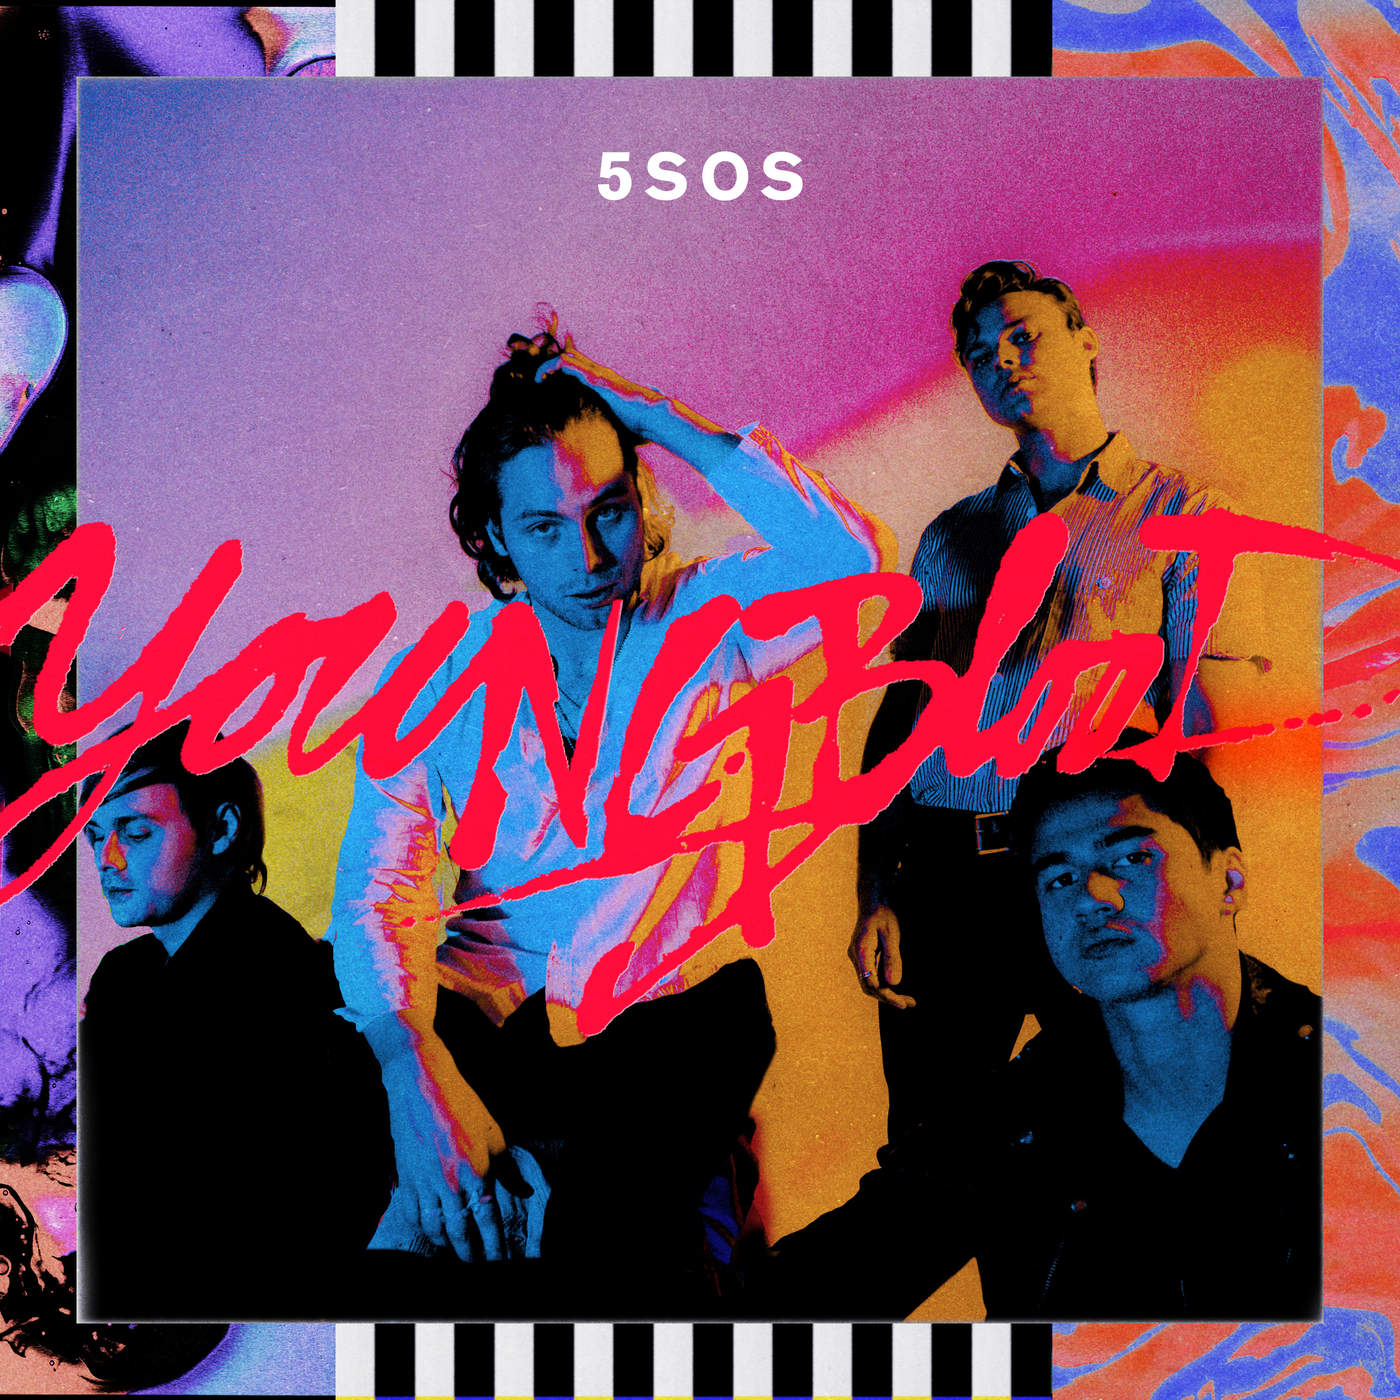 Five Seconds of Summer - Youngblood (Deluxe) - Album - [FLAC] -  2018